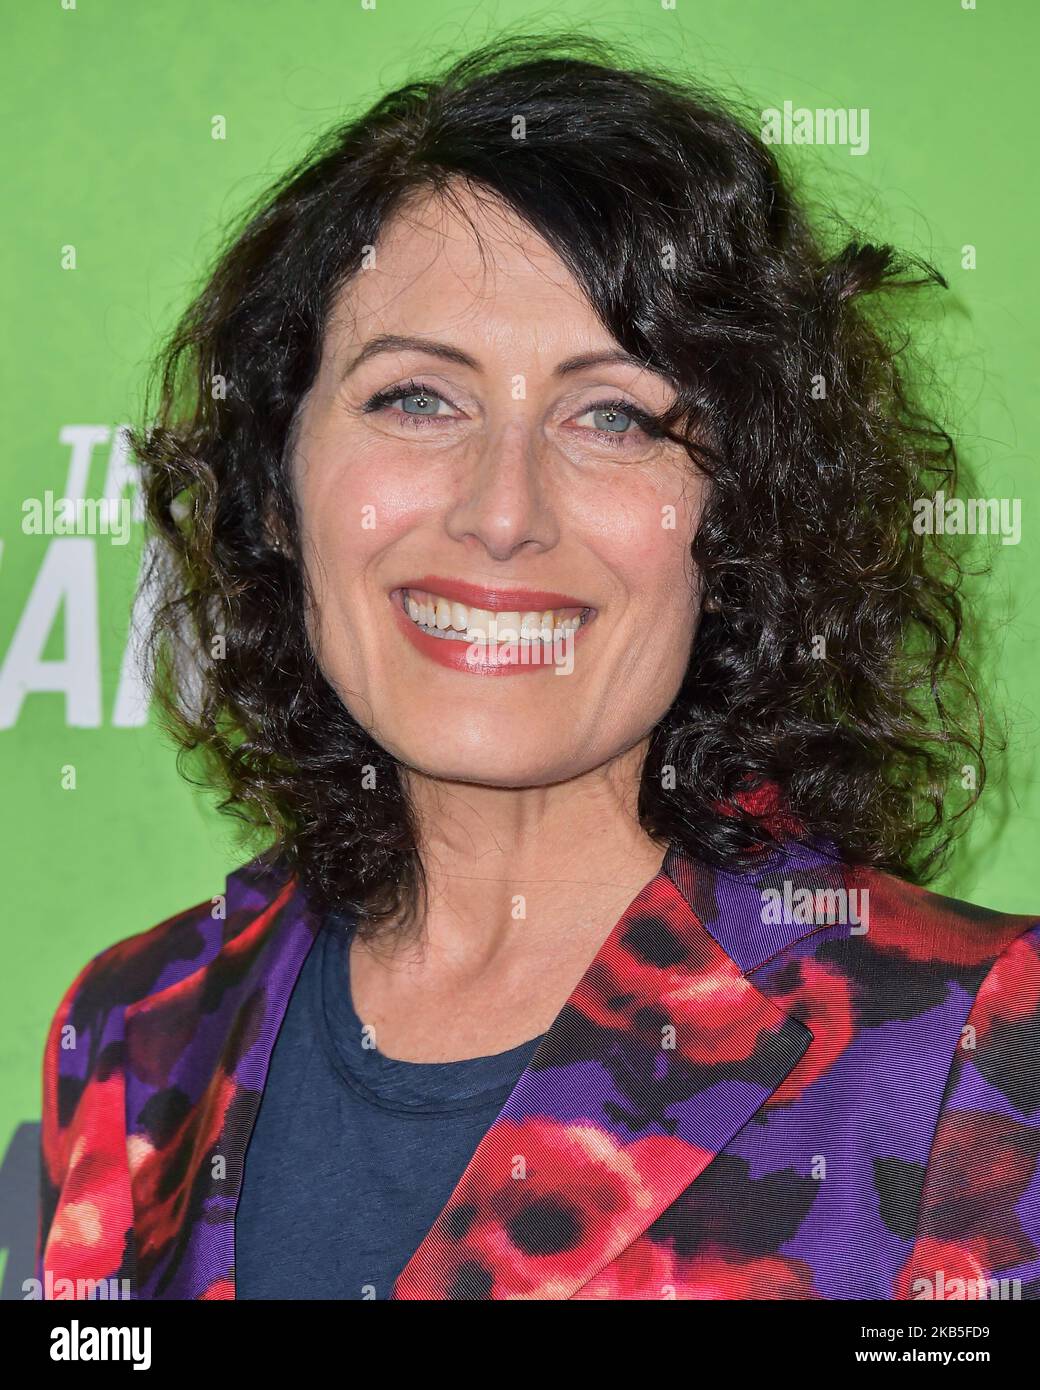 HOLLYWOOD, LOS ANGELES, CALIFORNIA, USA - SEPTEMBER 05: Lisa Edelstein arrives at the Los Angeles Premiere Of 'The Game Changers' held at ArcLight Cinemas Hollywood on September 5, 2019 in Hollywood, Los Angeles, California, United States. (Photo by Image Press Agency/NurPhoto) Stock Photo